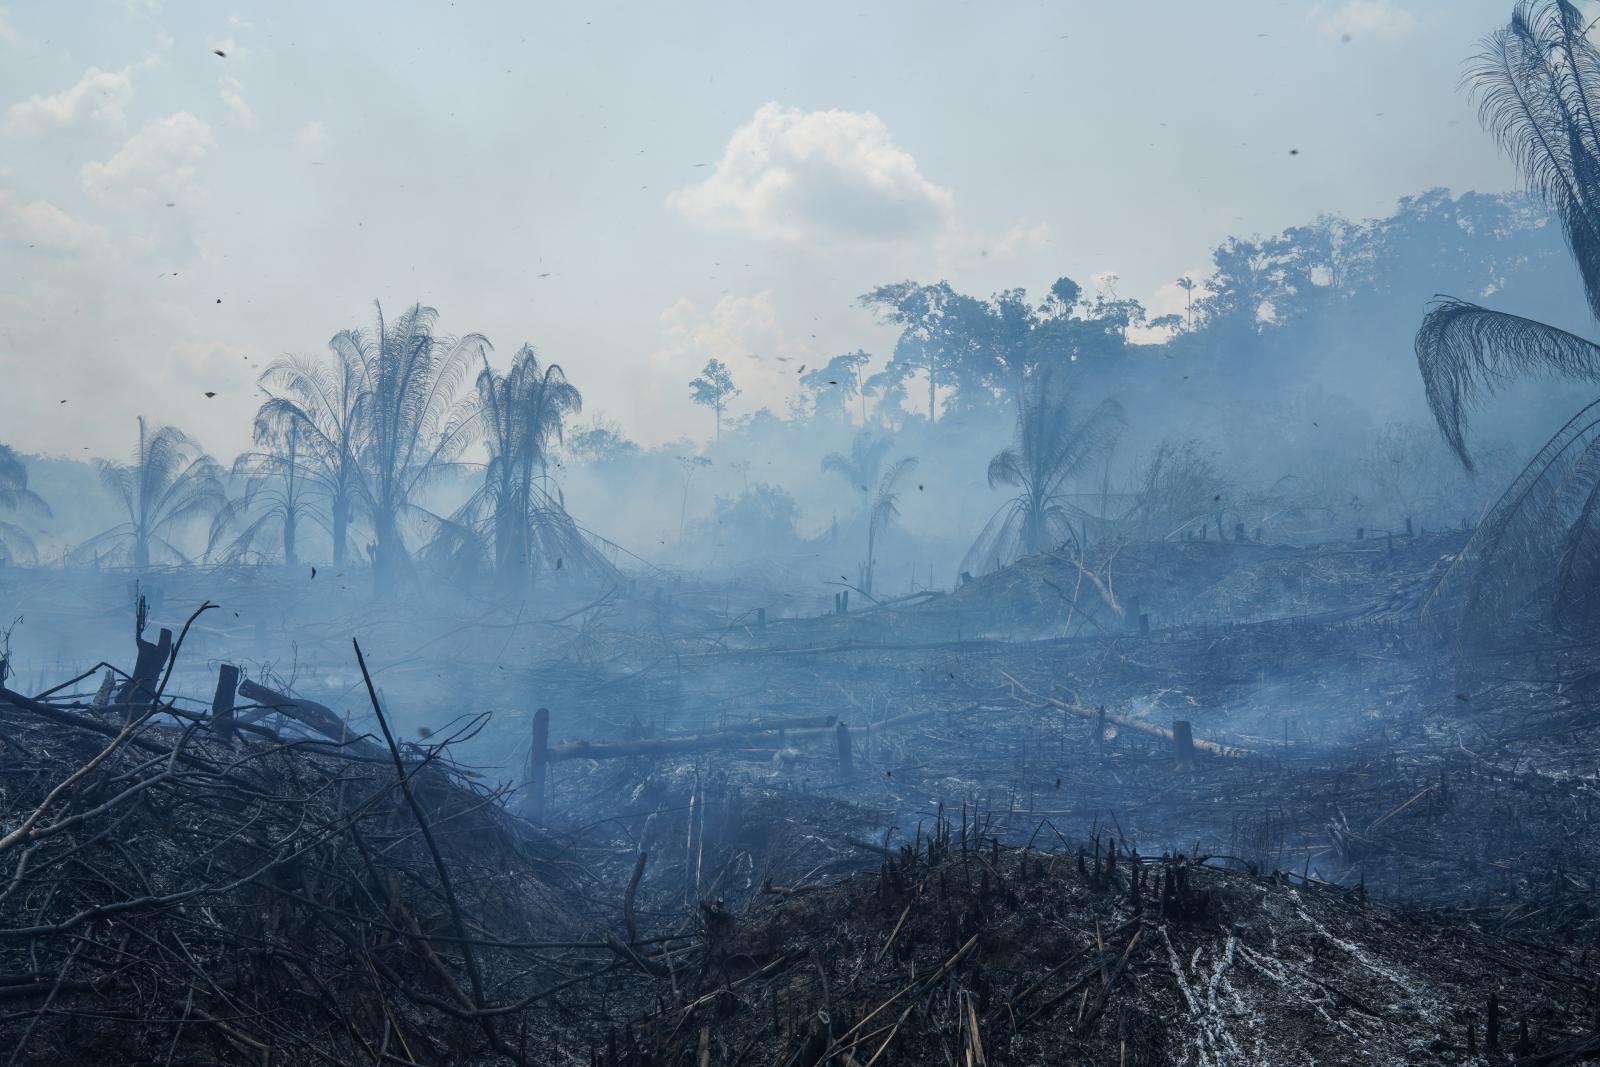 Land being burned for cattle gr...he Amazon rainforest near Acre.